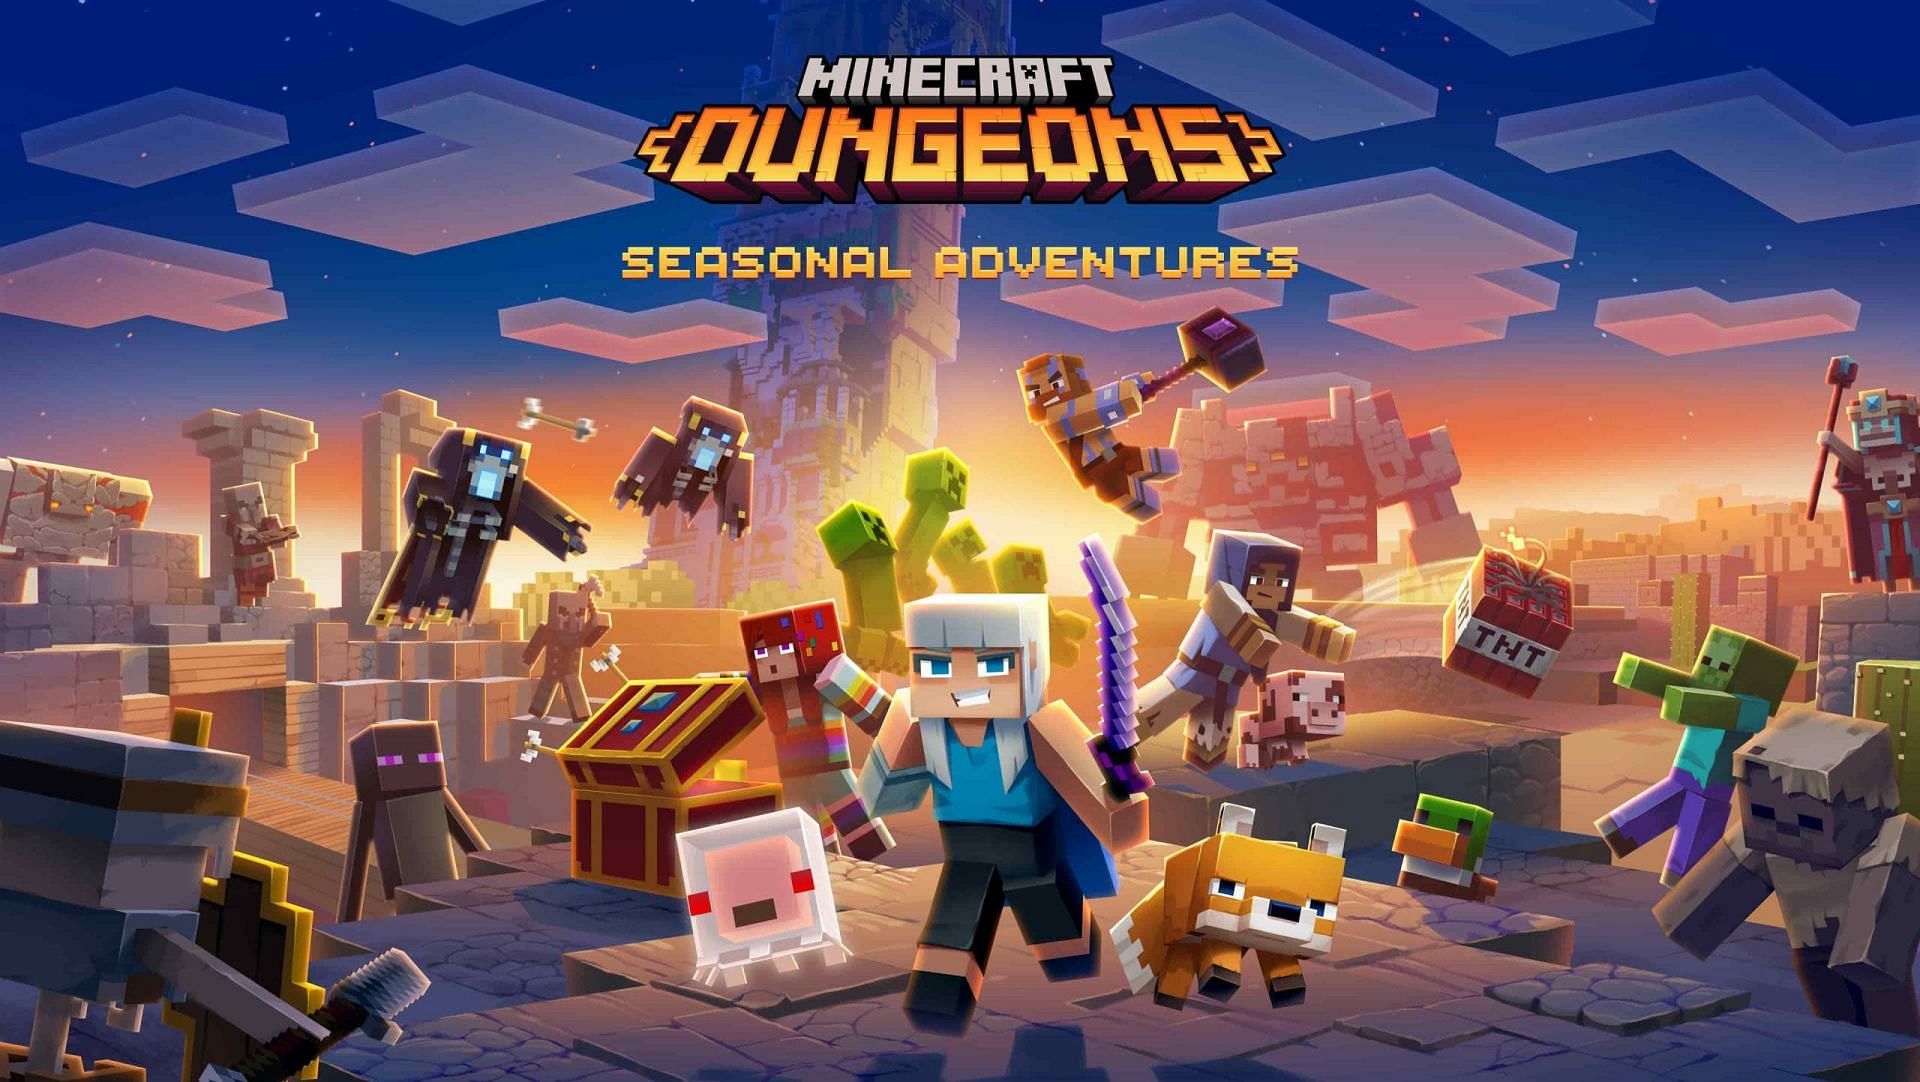 Seasonal Adventures are a new way to experience Minecraft Dungeons that introduces new challenges and rewards (Image via Mojang).